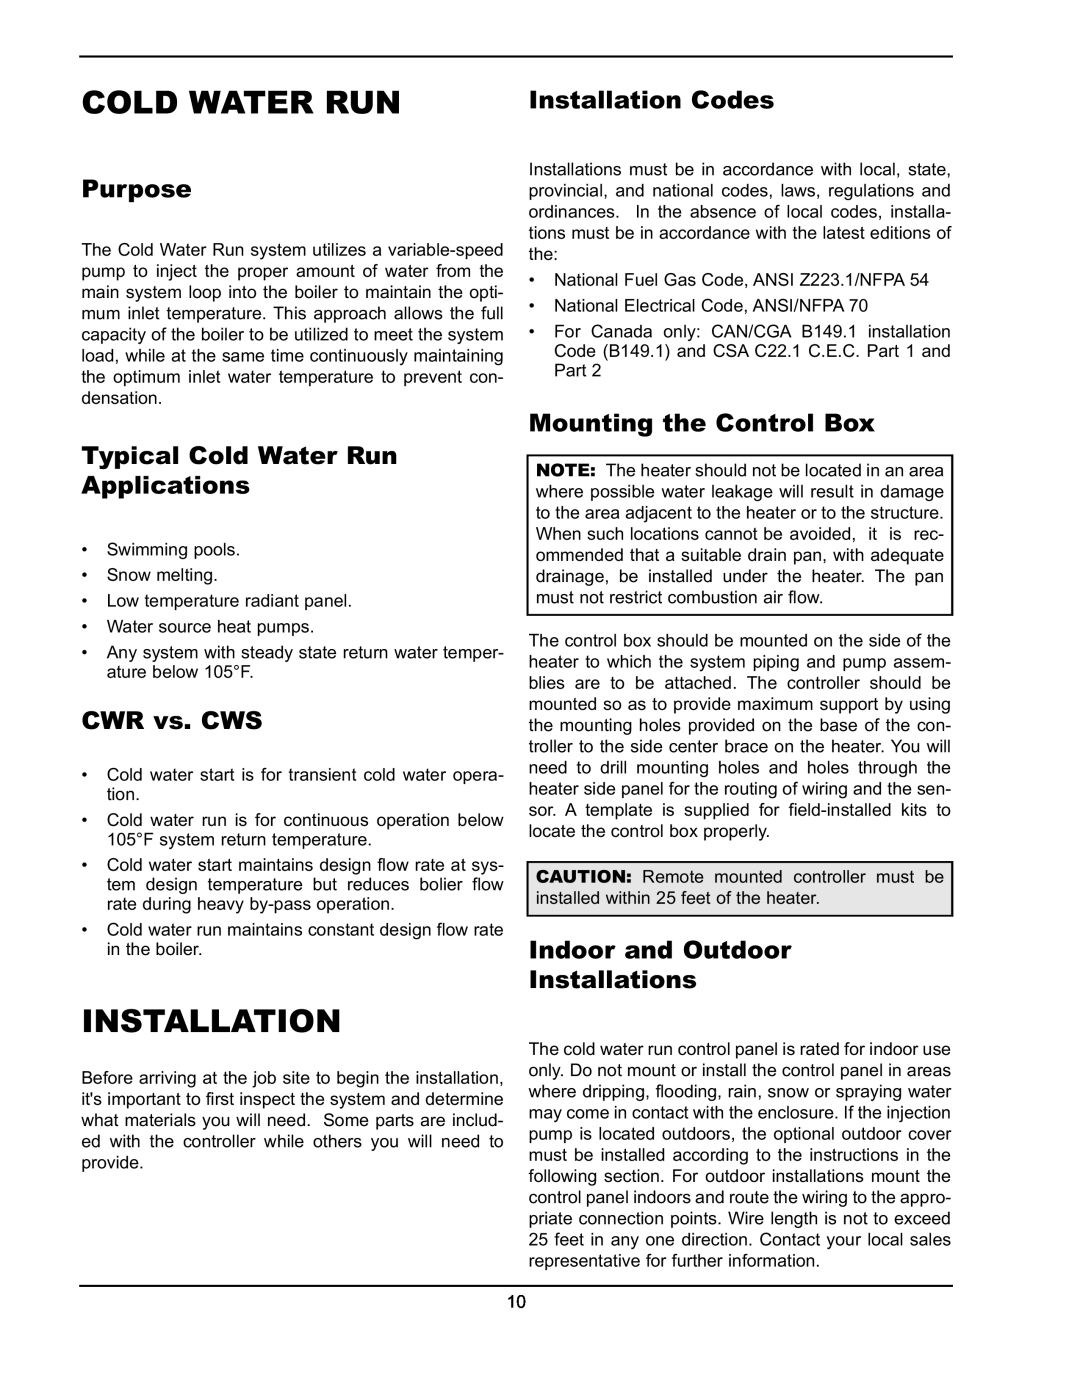 Raypak 241275 Purpose, Typical Cold Water Run Applications, CWR vs. CWS, Installation Codes, Mounting the Control Box 